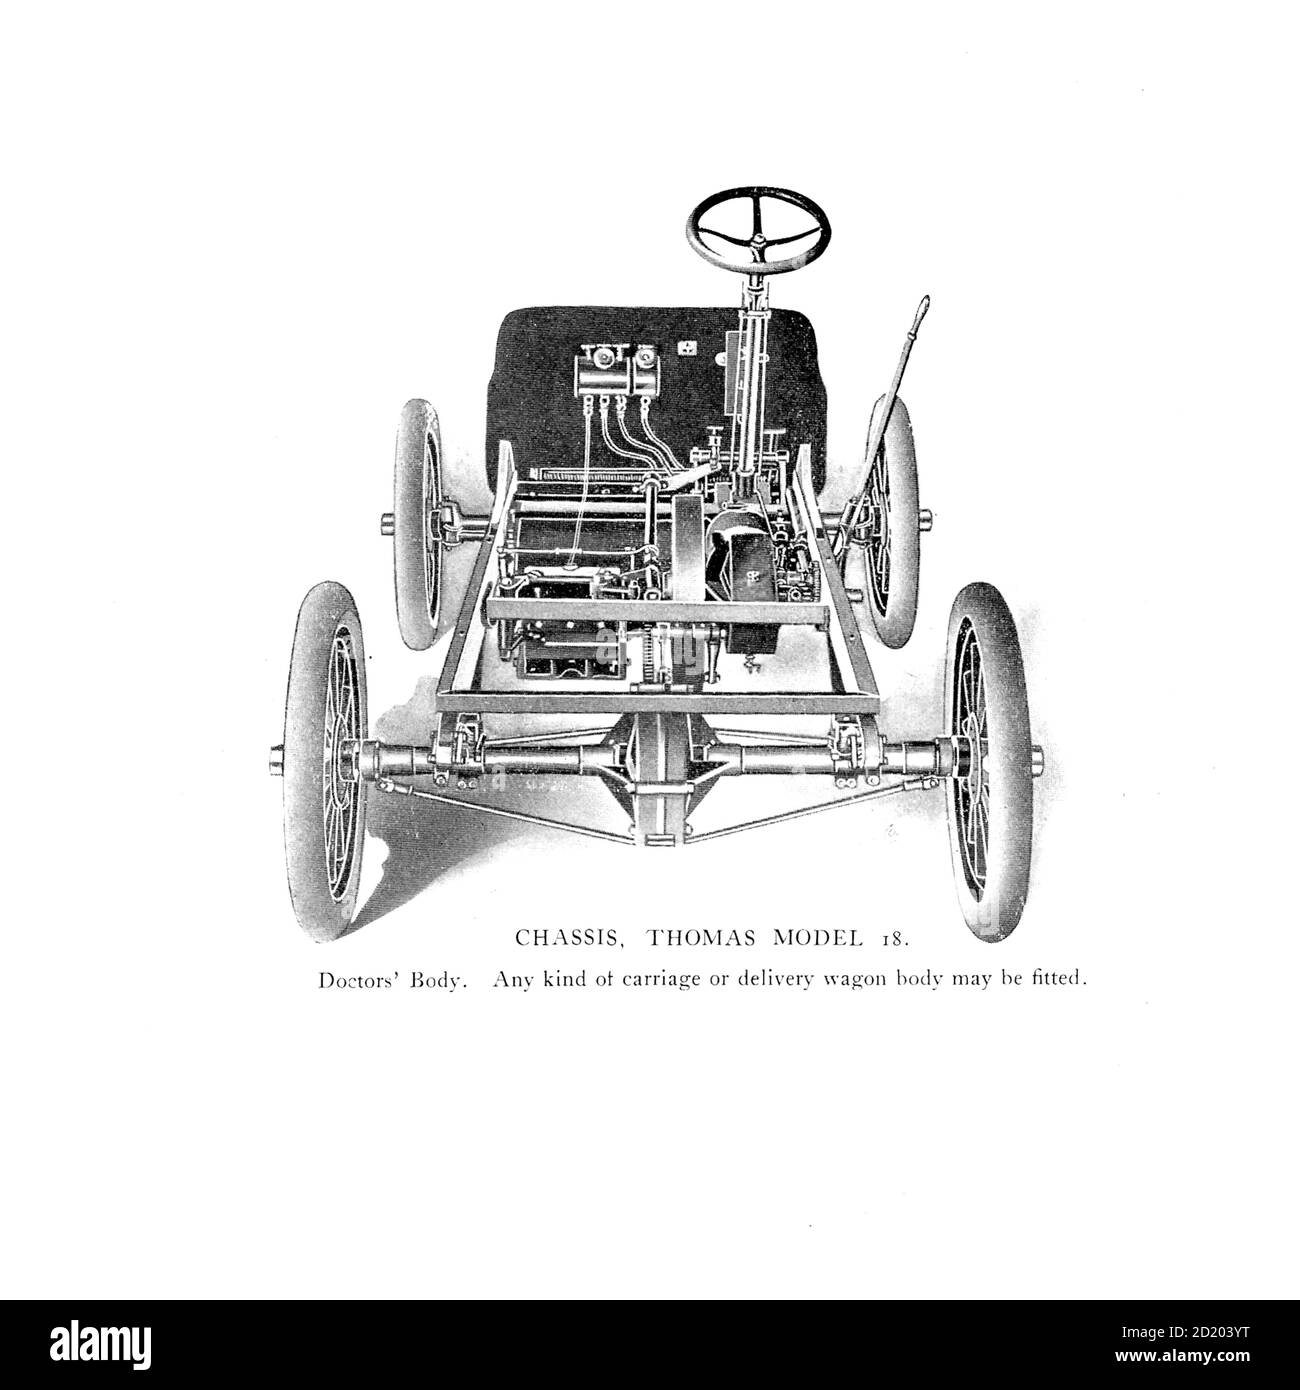 Thomas Model 18 (Chassis) From the E. R. Thomas Motor Co. Inc Advance Catalogue — Maker Of Automobiles and Auto-Bi Motorcycles — From Buffalo New York, USA, Printed 1903. E. R. Thomas Motor Company was a manufacturer of motorized bicycles, motorized tricycles, motorcycles, and automobiles in Buffalo, New York between 1900 and 1919 Stock Photo